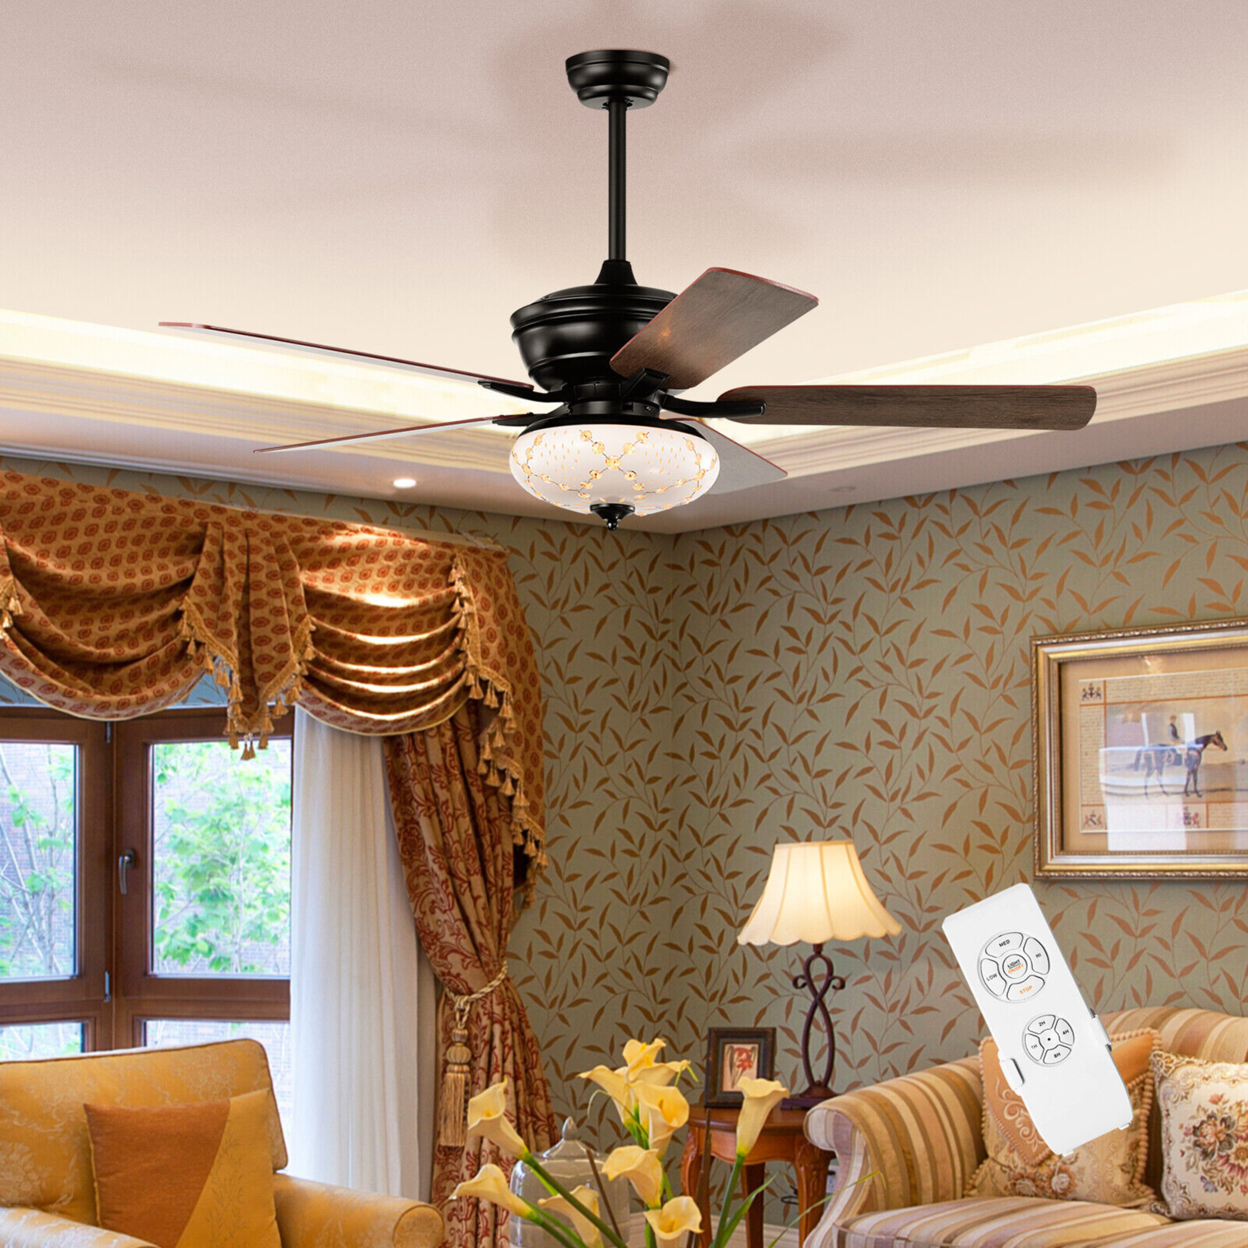 52'' Ceiling Fan With 3 Wind Speeds 5 Reversible Blades & Remote Control - Matte Black